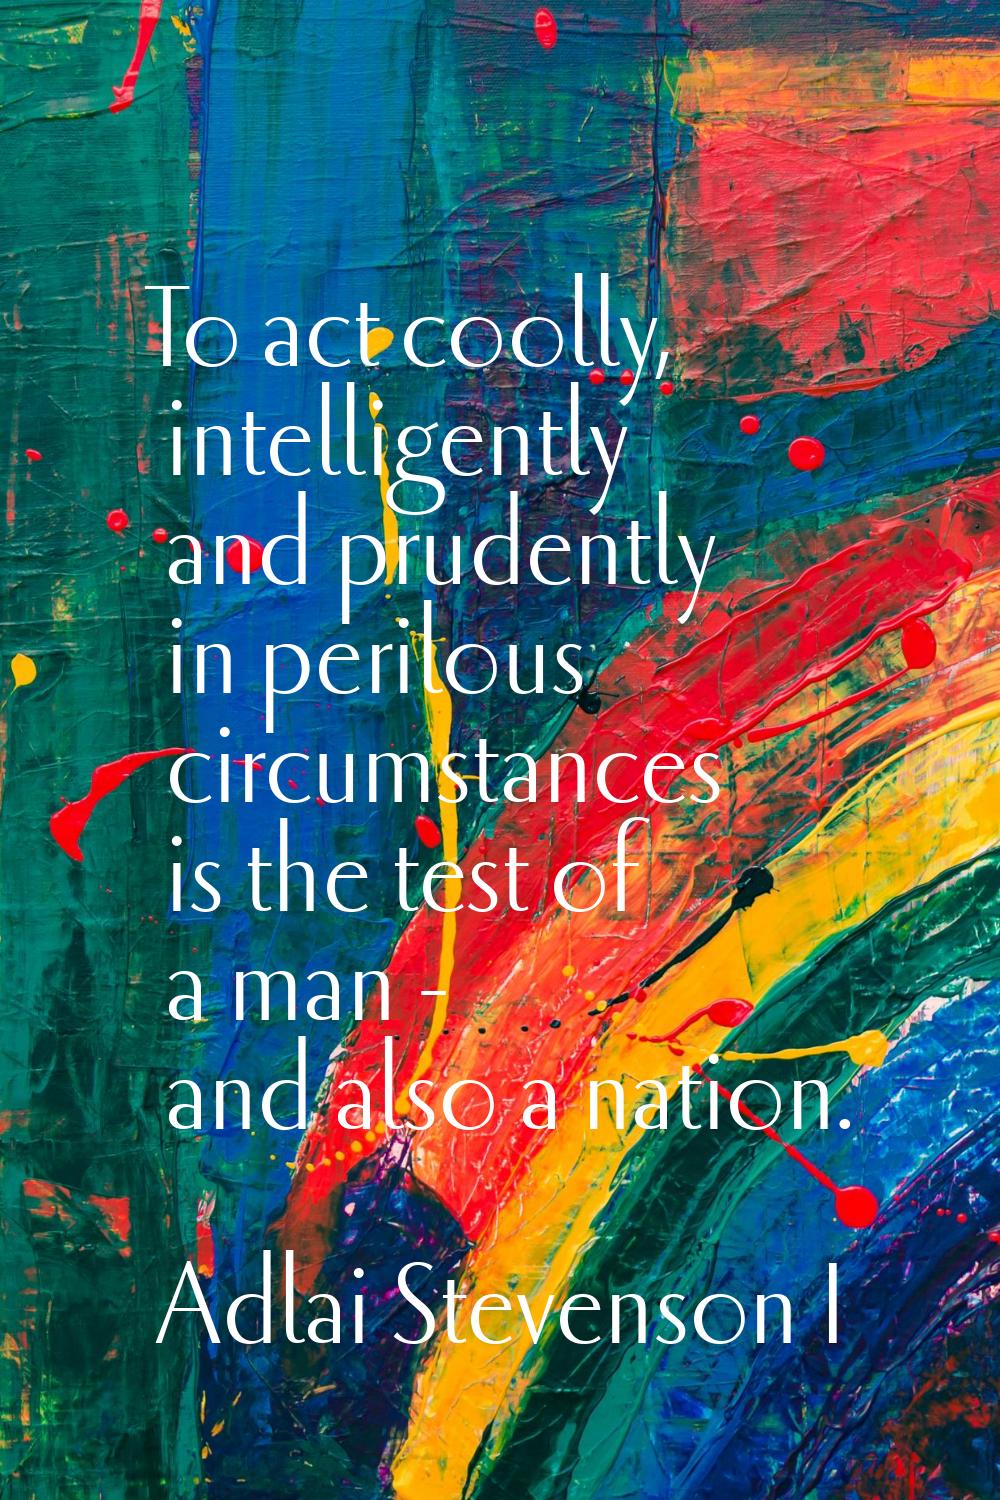 To act coolly, intelligently and prudently in perilous circumstances is the test of a man - and als